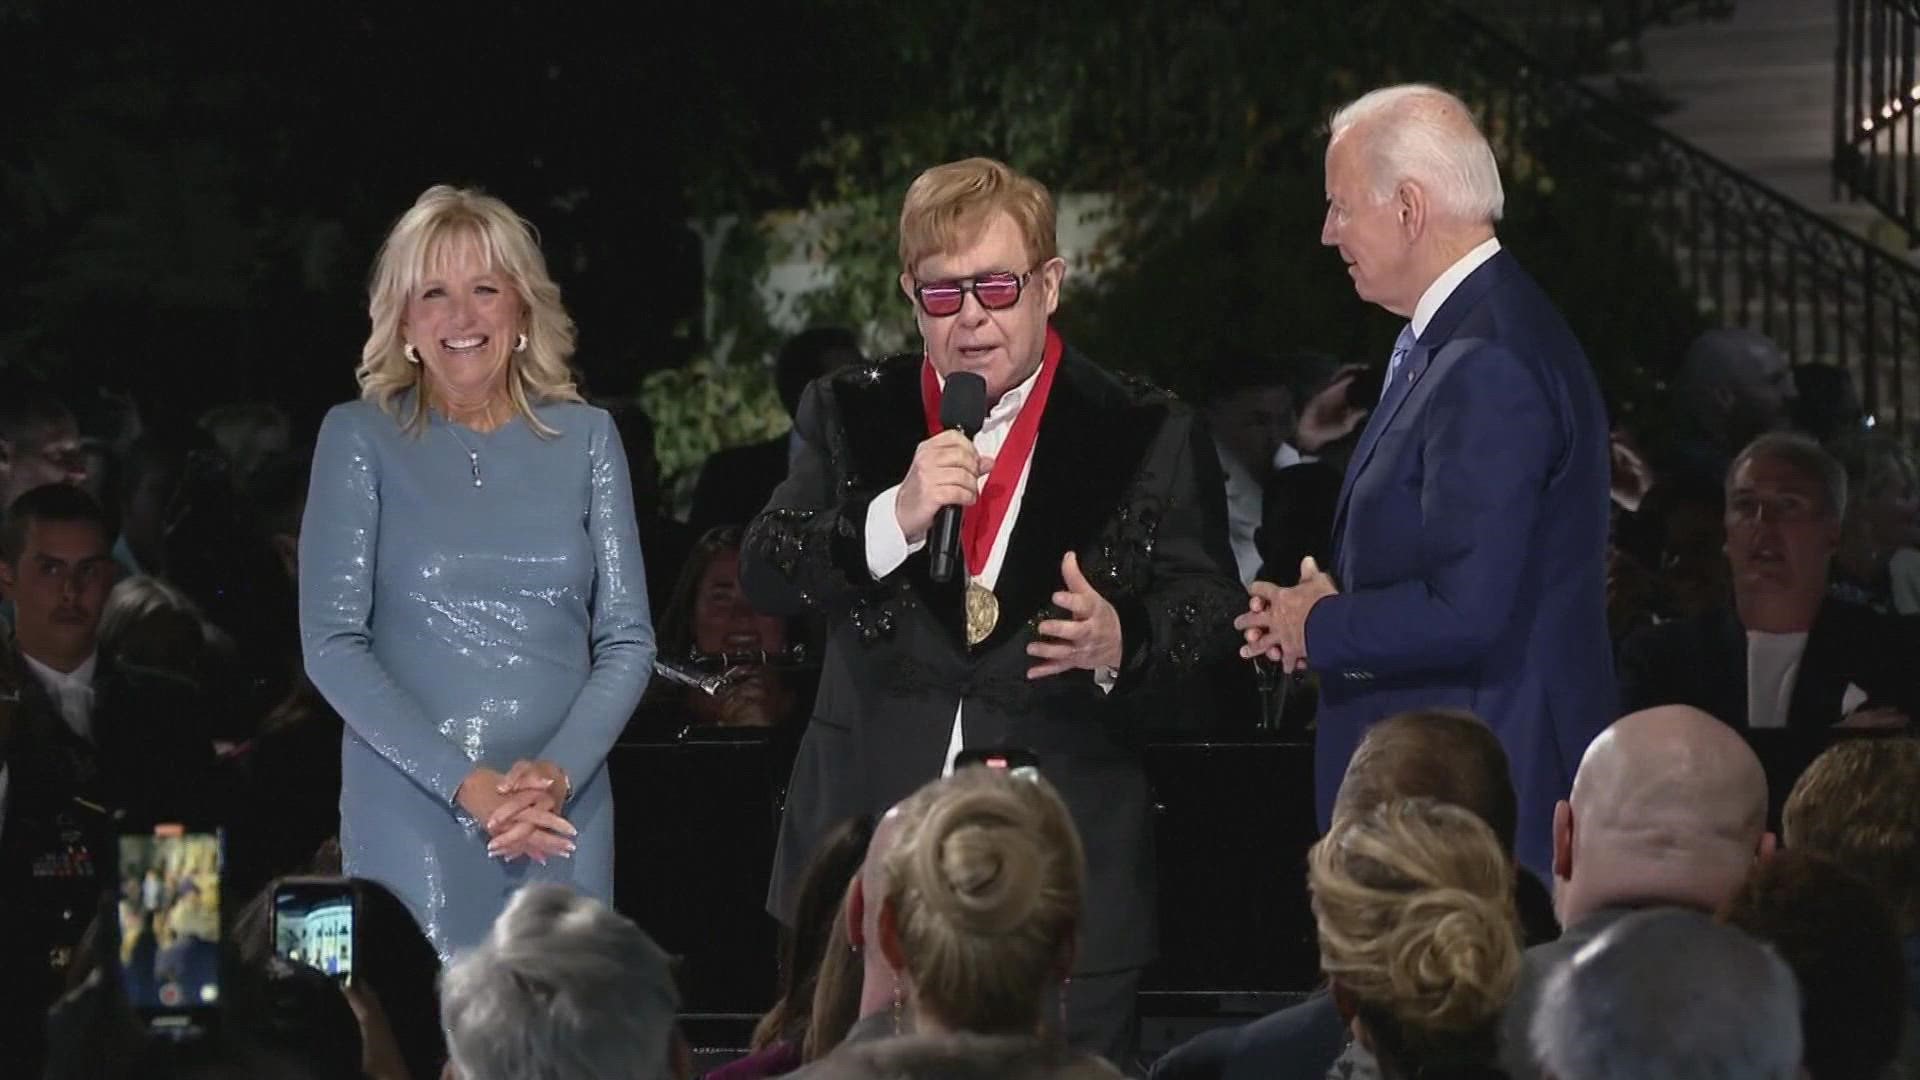 President Joe Biden surprised Elton John with the National Humanities Medal for being a “tidal wave” who helped people rise up for justice.